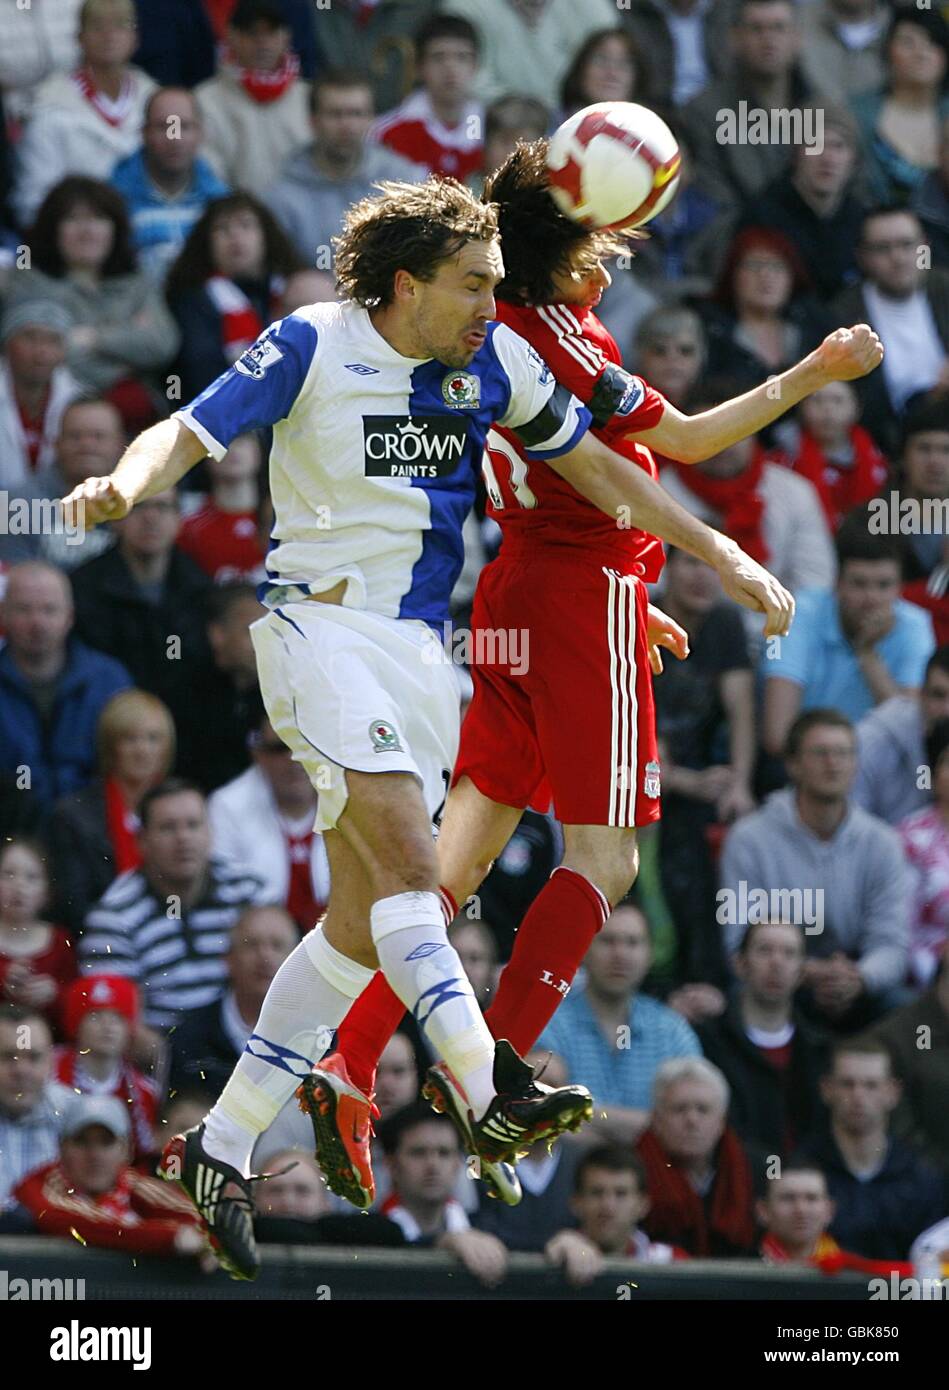 Soccer - Barclays Premier League - Liverpool v Blackburn Rovers - Anfield. Blackburn Rovers' Gael Givet (left) and Liverpool's Yossi Benayoun battle for the ball. Stock Photo